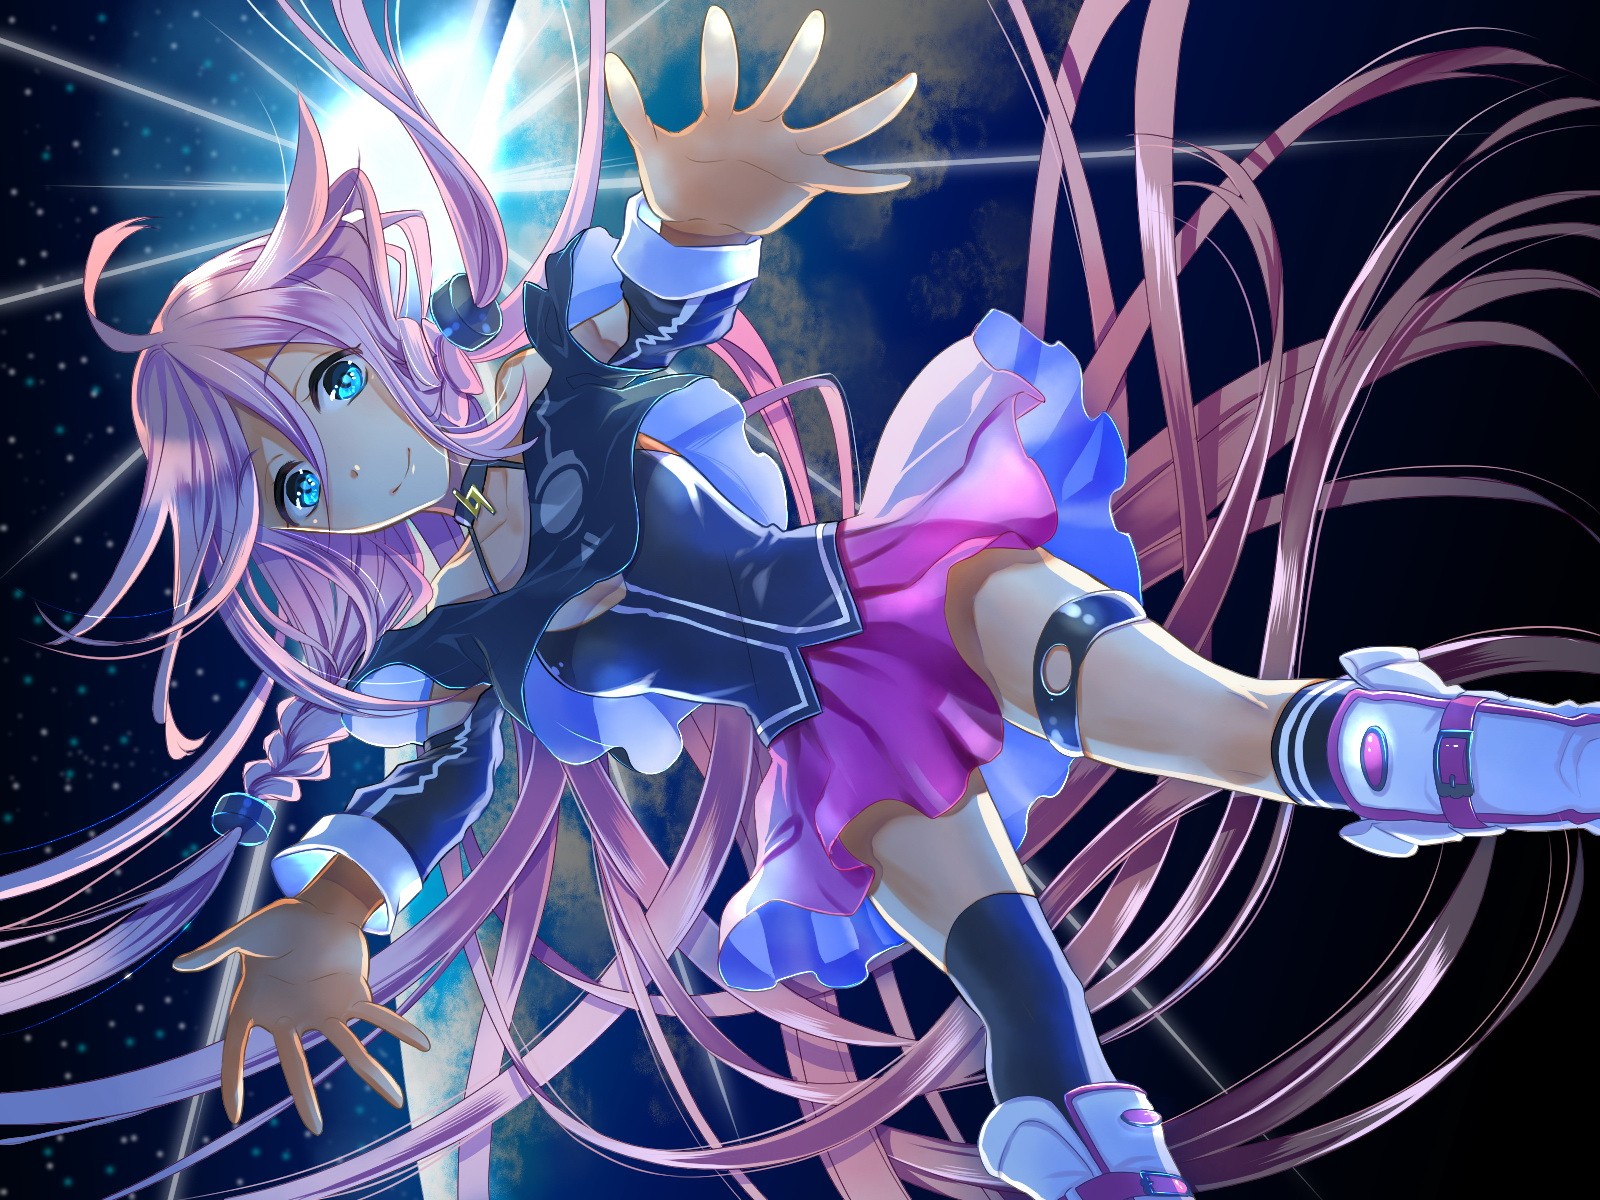 boots, Outer, Space, Vocaloid, Stars, Blue, Eyes, Planets, Skirts, Falling, Down, Long, Hair, Pink, Hair, Thigh, Highs, Braids, Choker, Anime, Girls, Glowing, Eyes, Spread, Arms, Hair, Ornaments, Knee, Socks, Ba Wallpaper